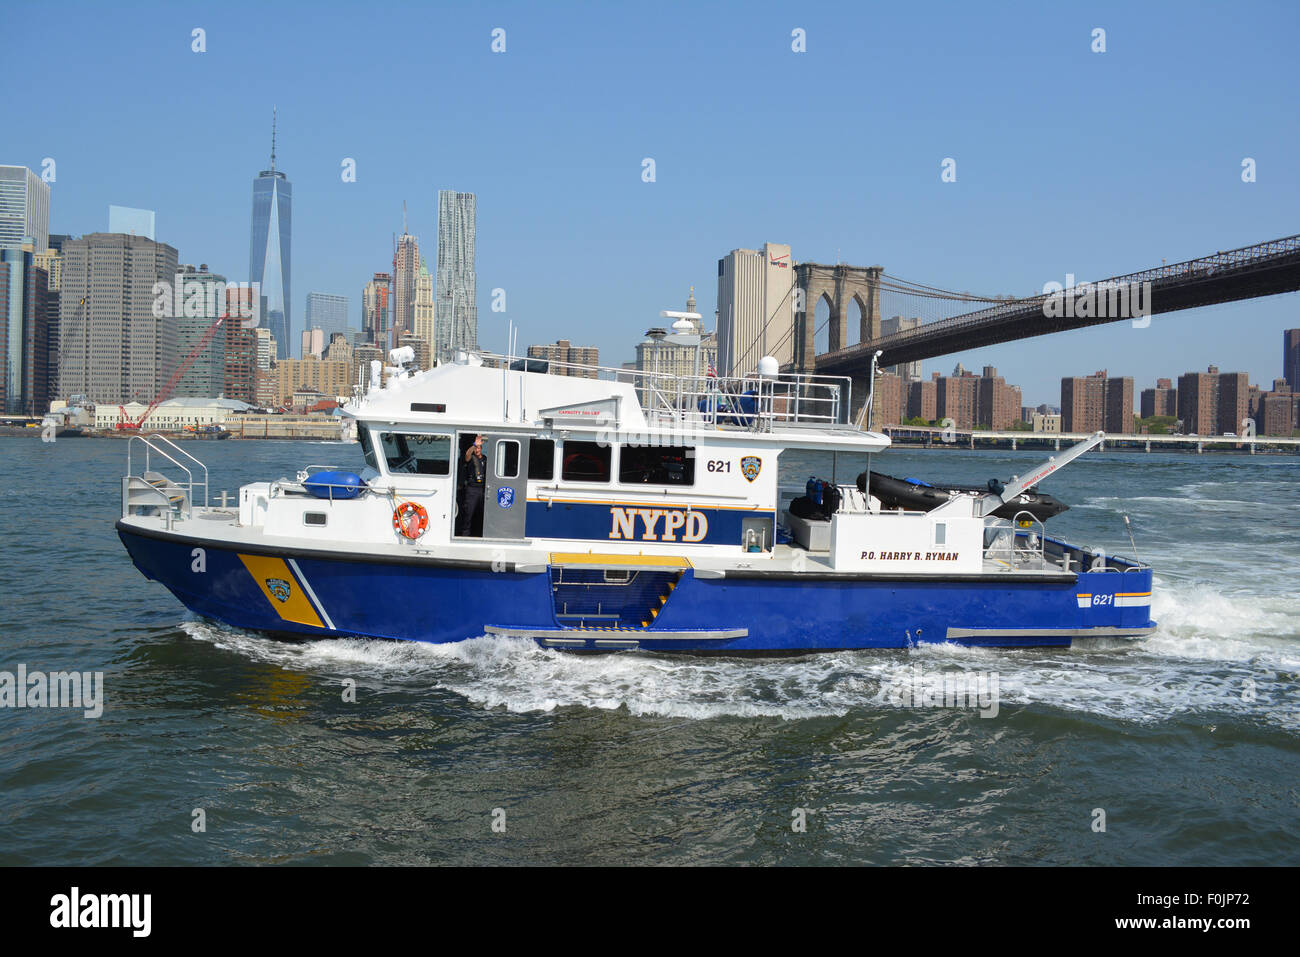 NYPD Boot reagiert zu einem Notfall am East River in New York City. Stockfoto